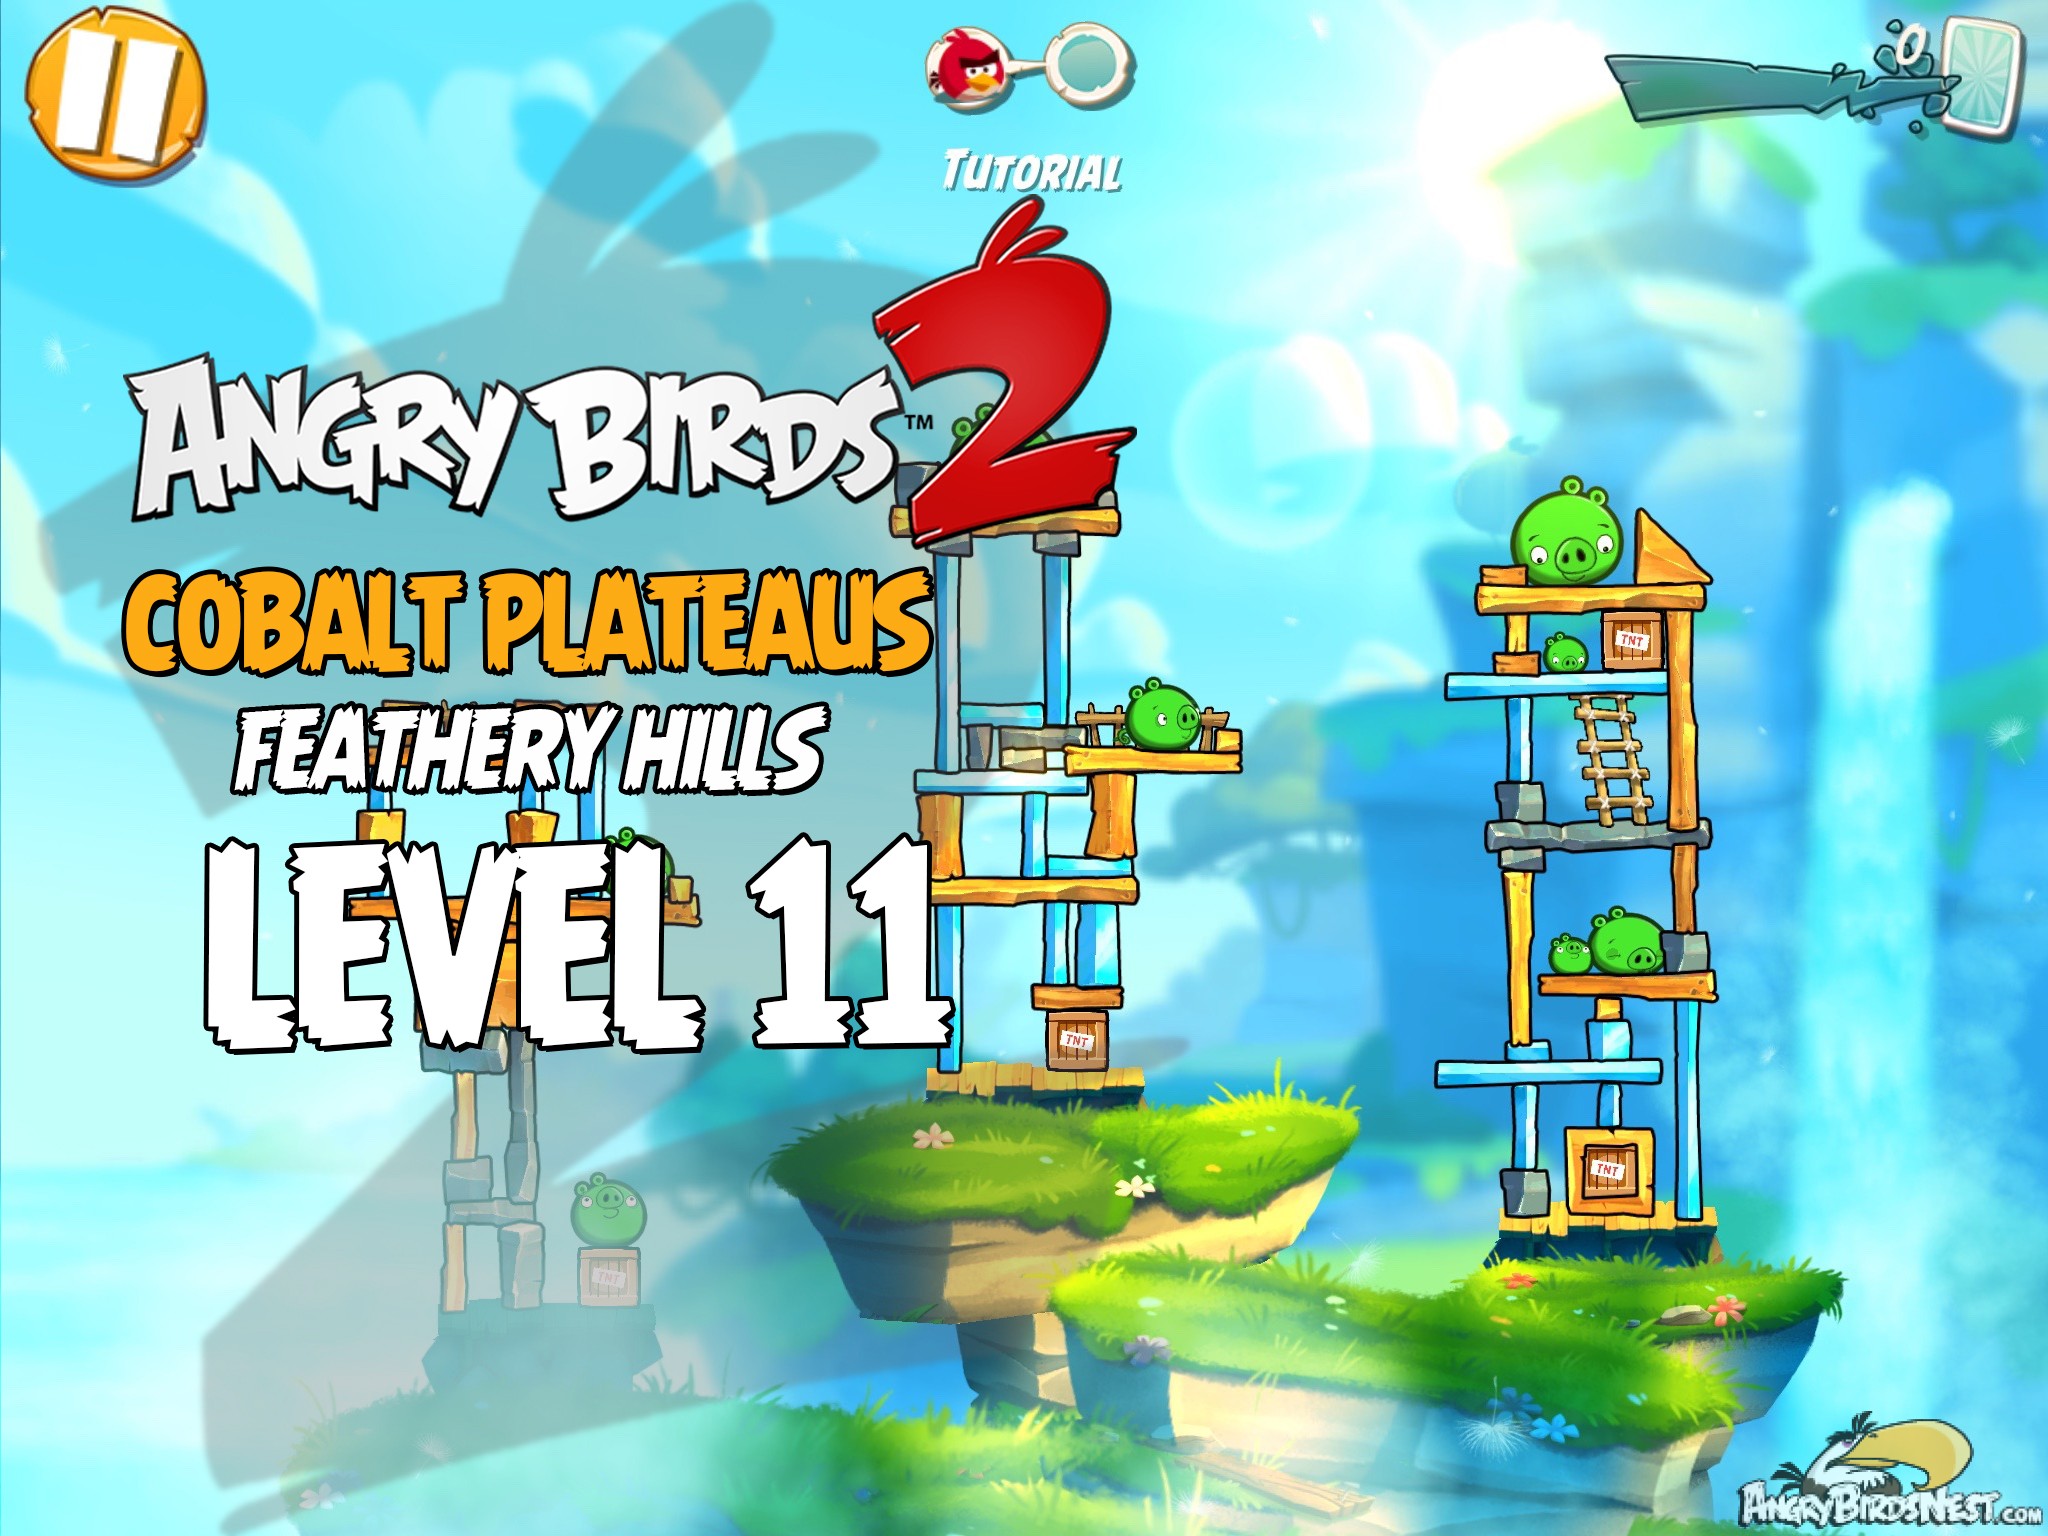 Angry Birds 2 Cobalt Plateaus Feathery Hills Level 11